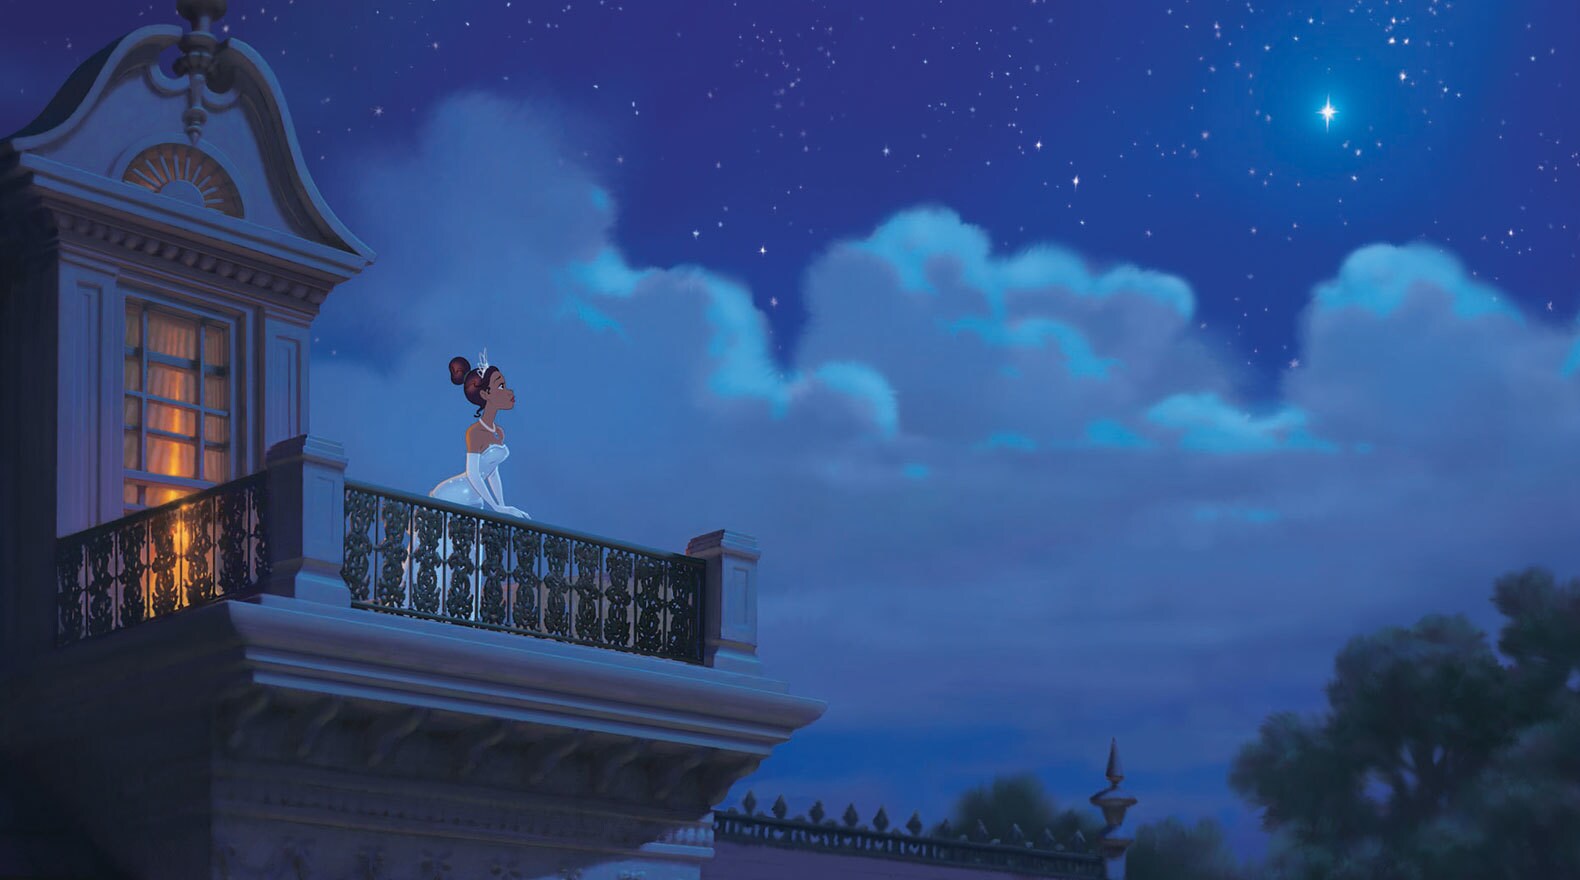 Tiana believes in hard work, but wishing upon a star can only help.